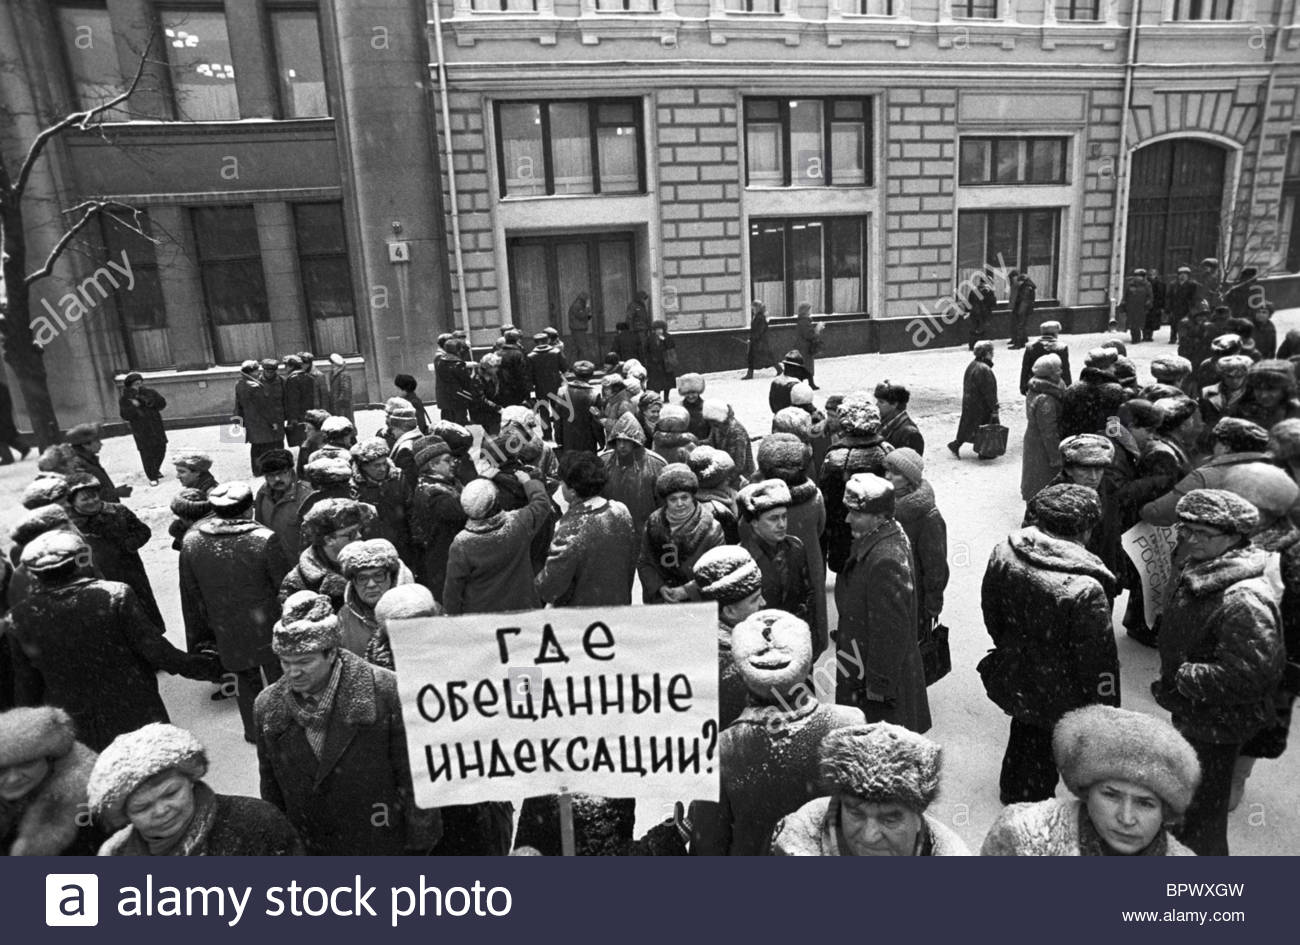 protest-action-of-independent-trade-unions-in-russia-1992-BPWXGW.jpg